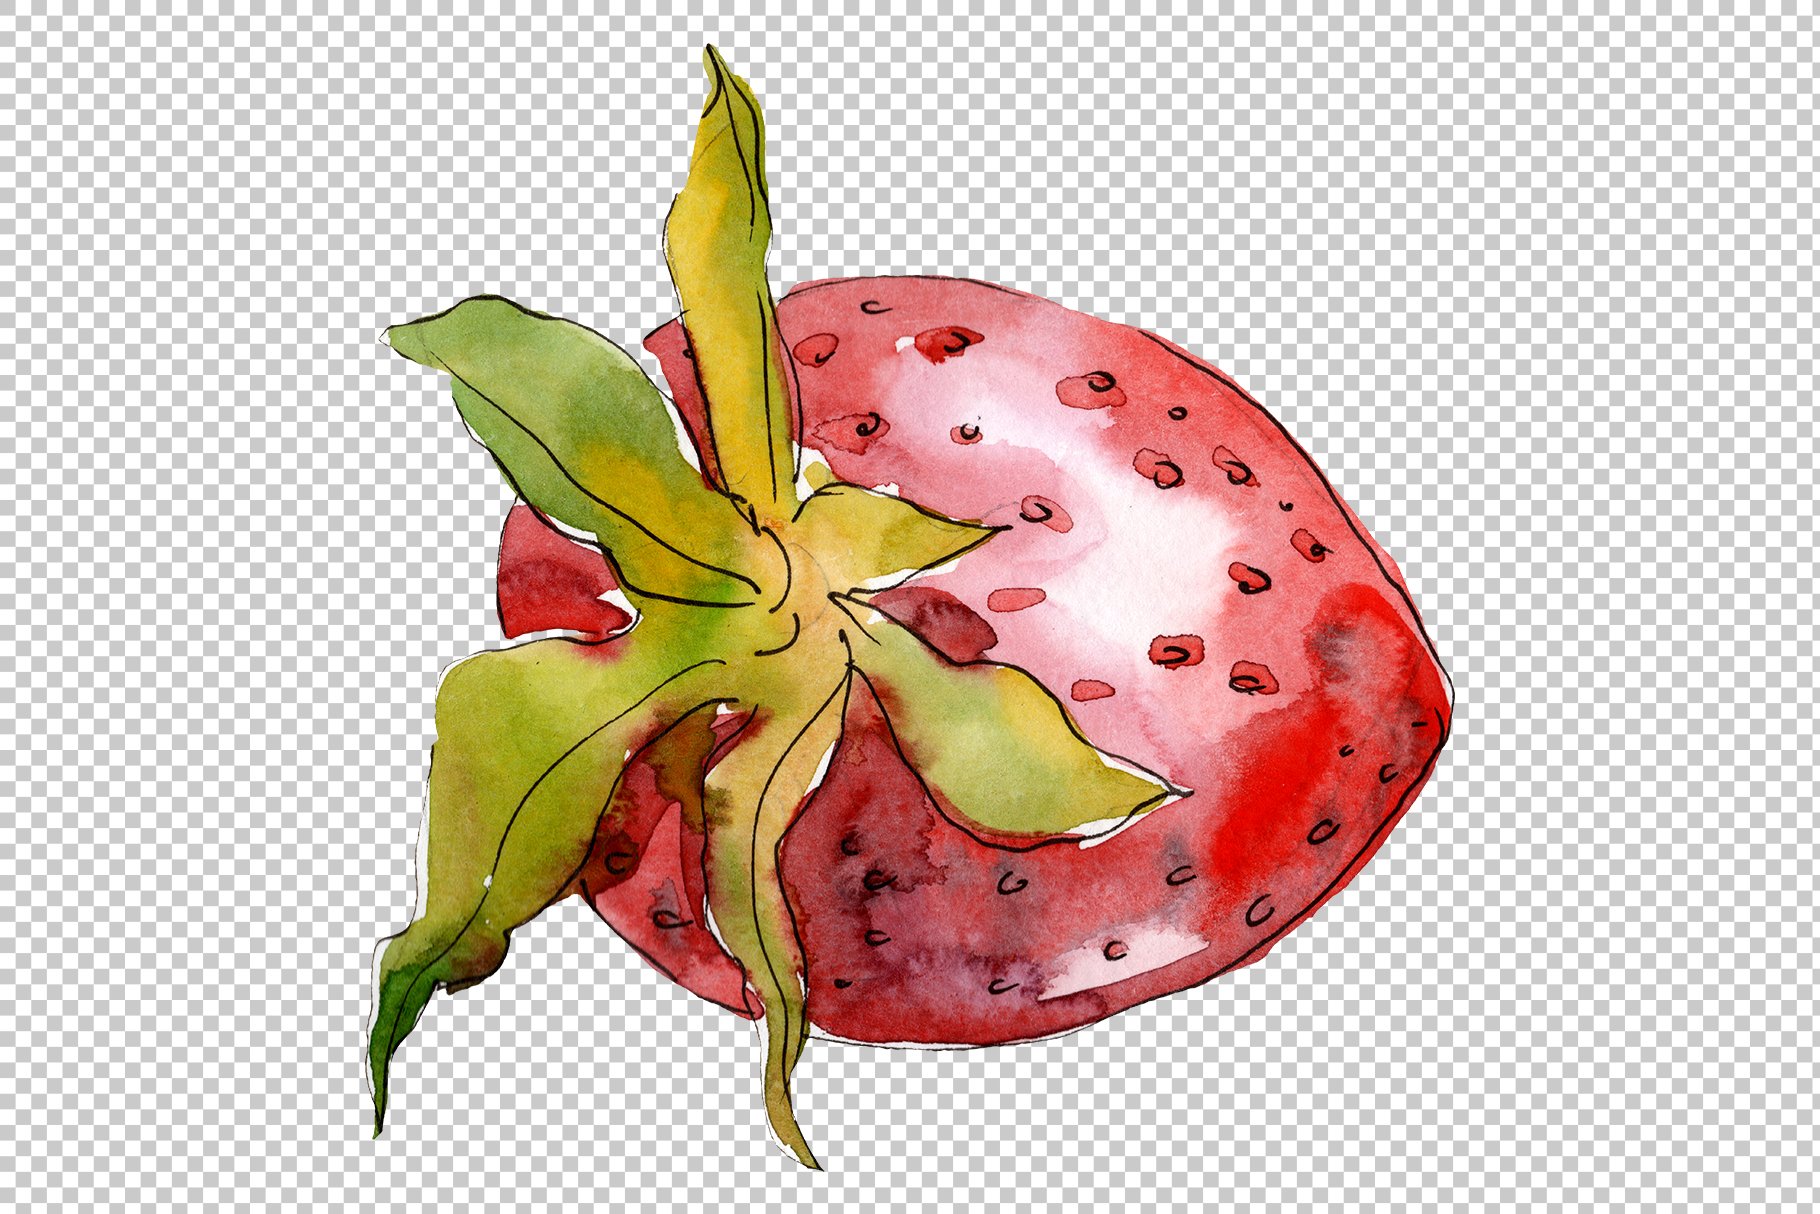 Transparent background with the strawberry in a watercolor.